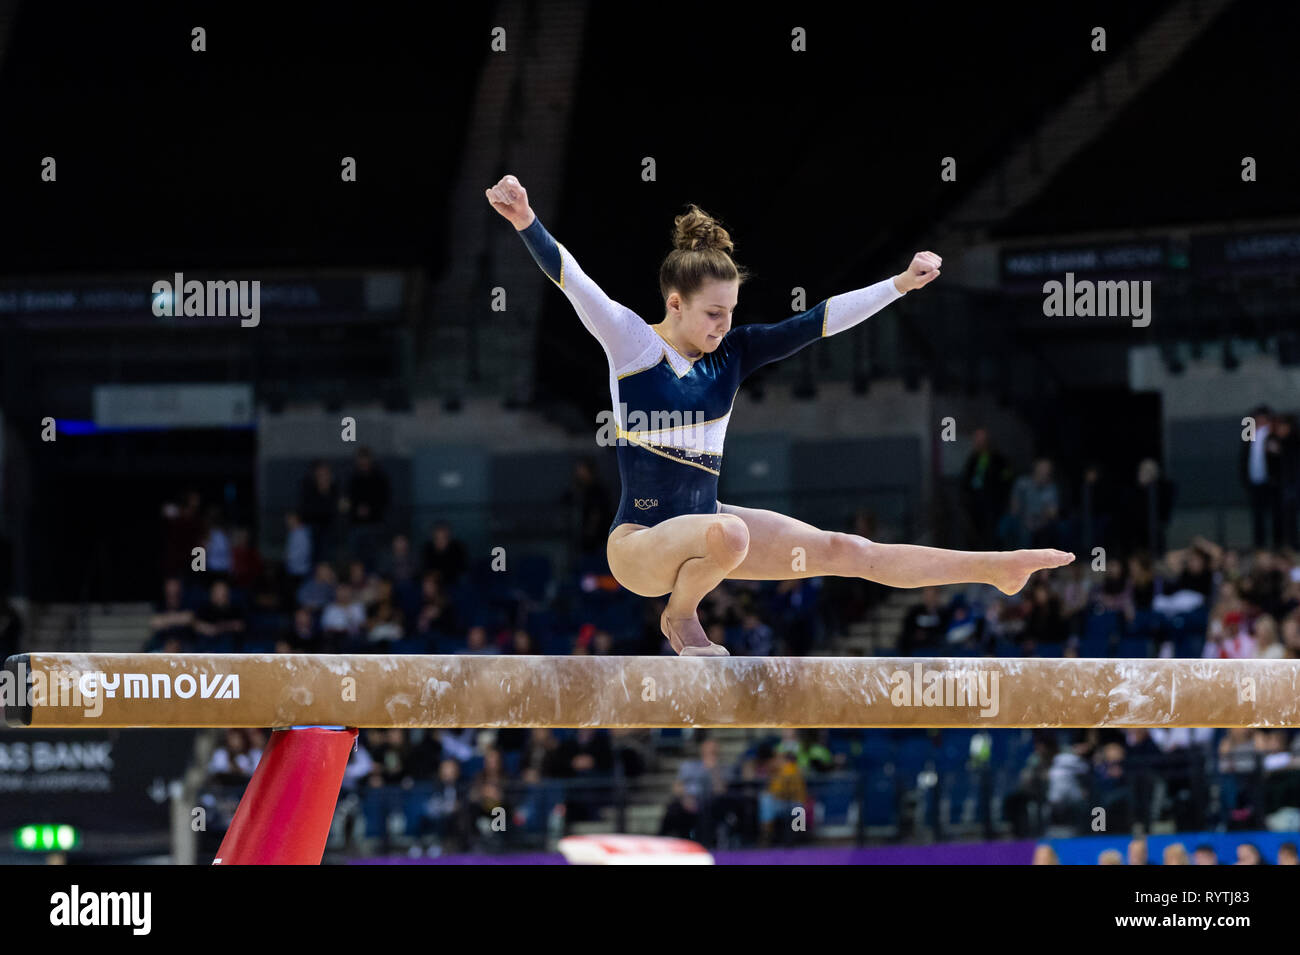 Liverpool, UK. 15th Mar, 2019. Rosie Bayliss of Greenwich Royals competing during the beam rotation at the Men's and Women's Artistic British Championships 2019, M&S Bank Arena, Liverpool, UK. Credit: Iain Scott Photography/Alamy Live News Stock Photo